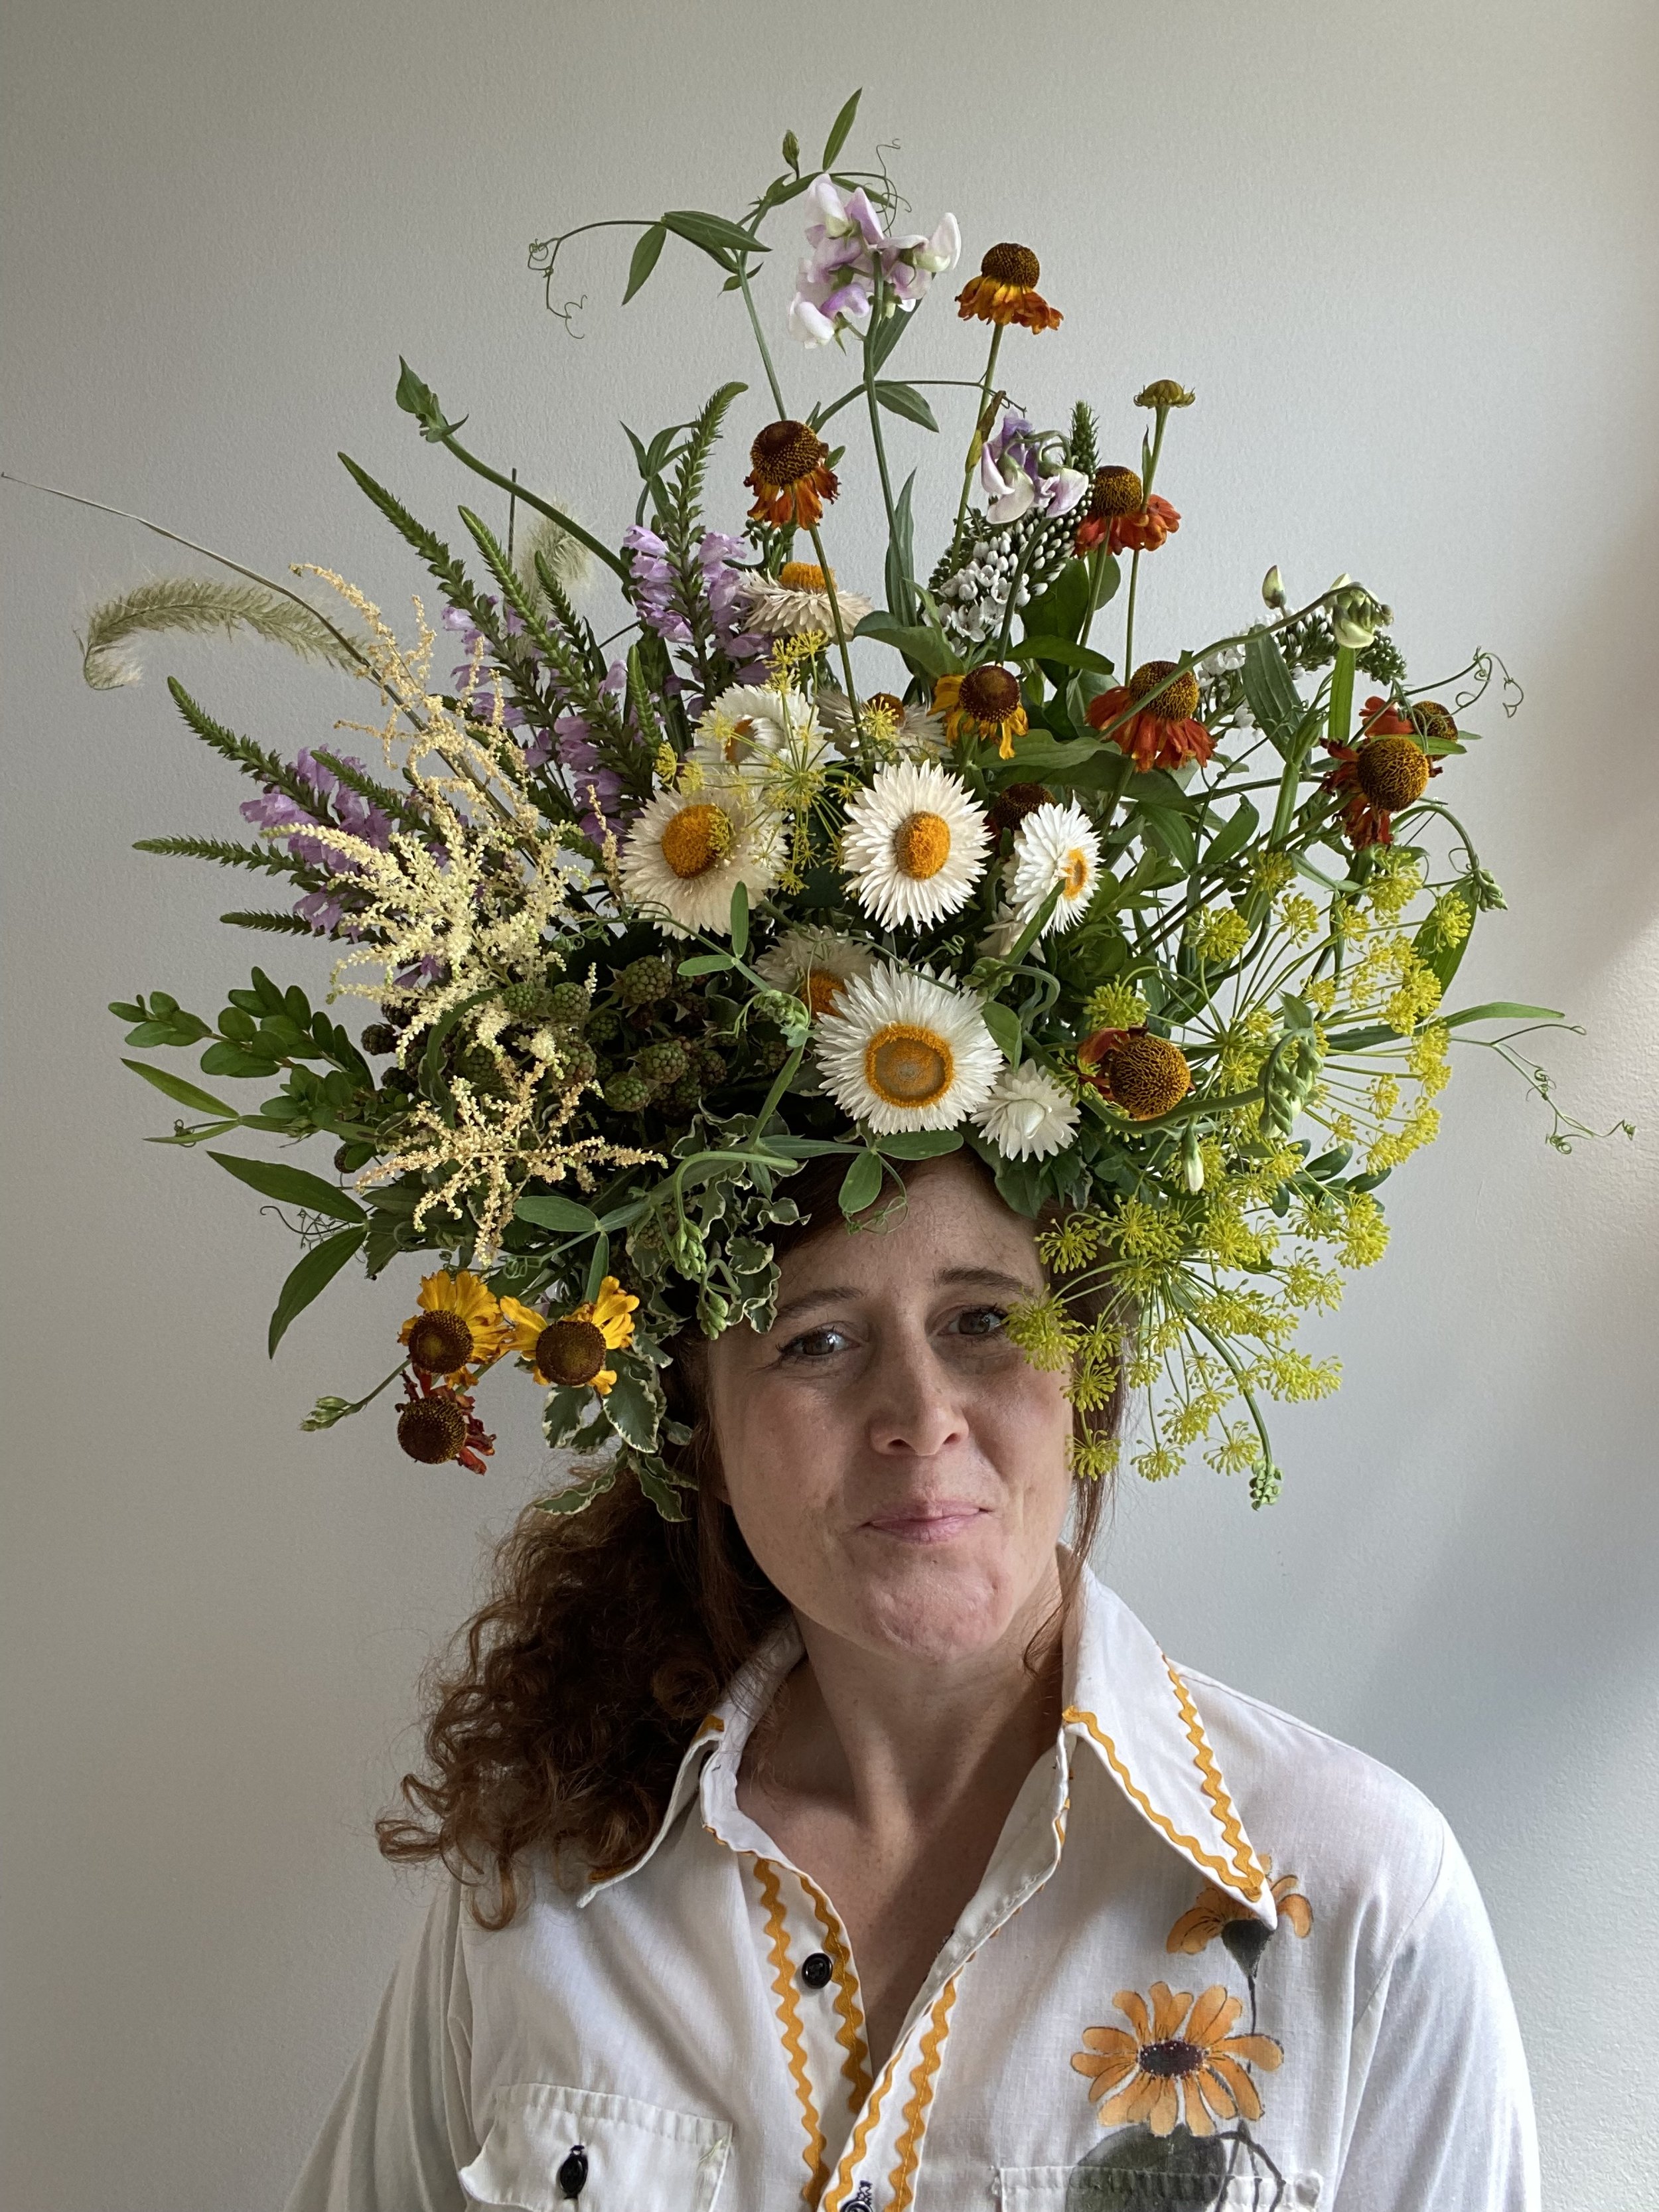 Sophie Powell, UFLO sporting one of her signature flower crowns